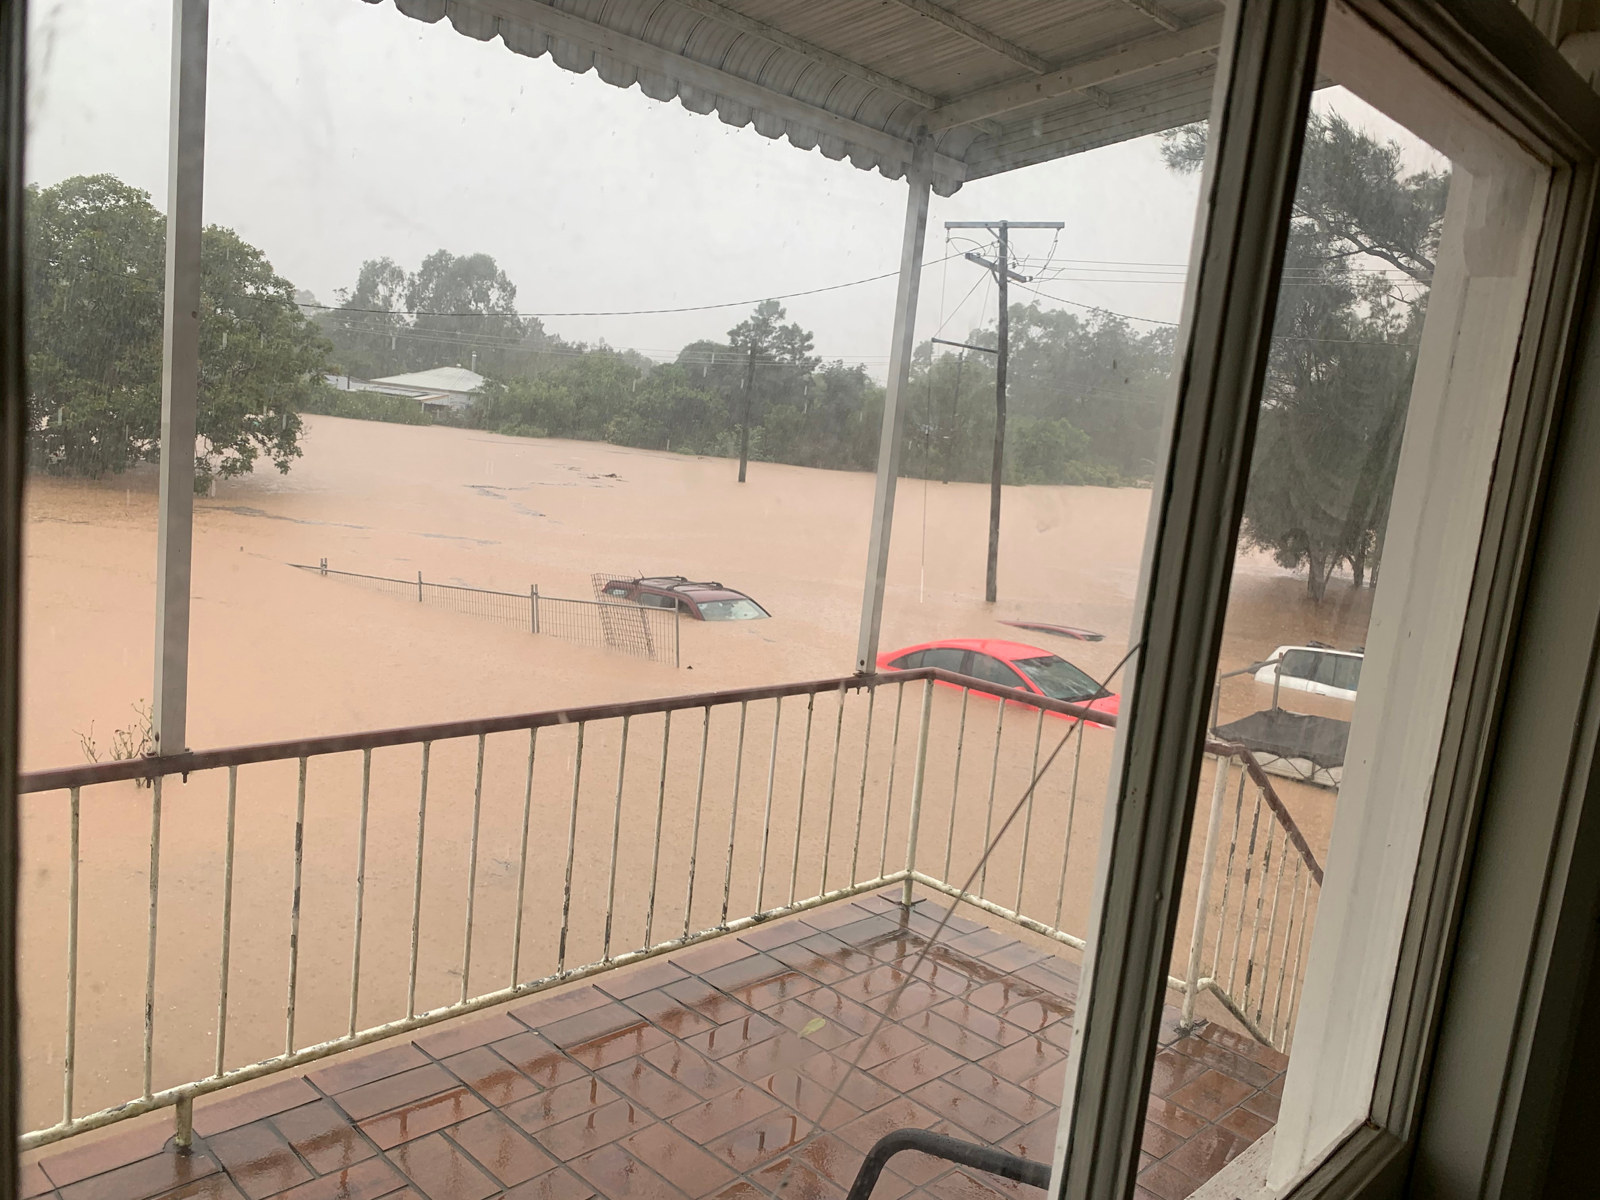 External damage caused by the NSW floods in 2022 in the North Lismore area (submission 0683)